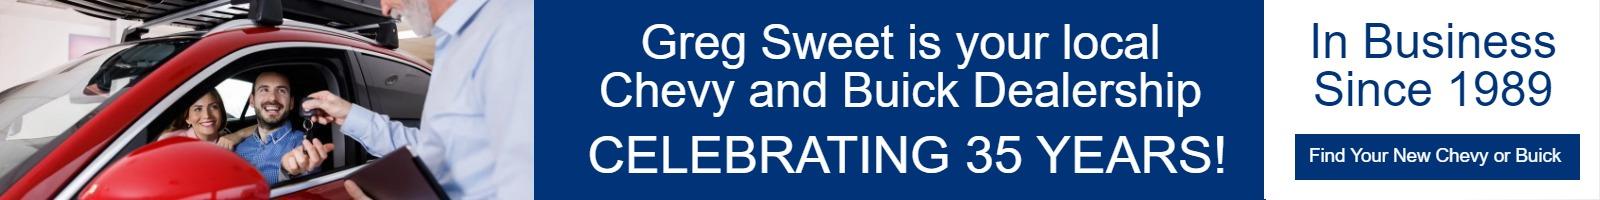 Greg Sweet is Your Chevy and Buick dealership for 34 years!